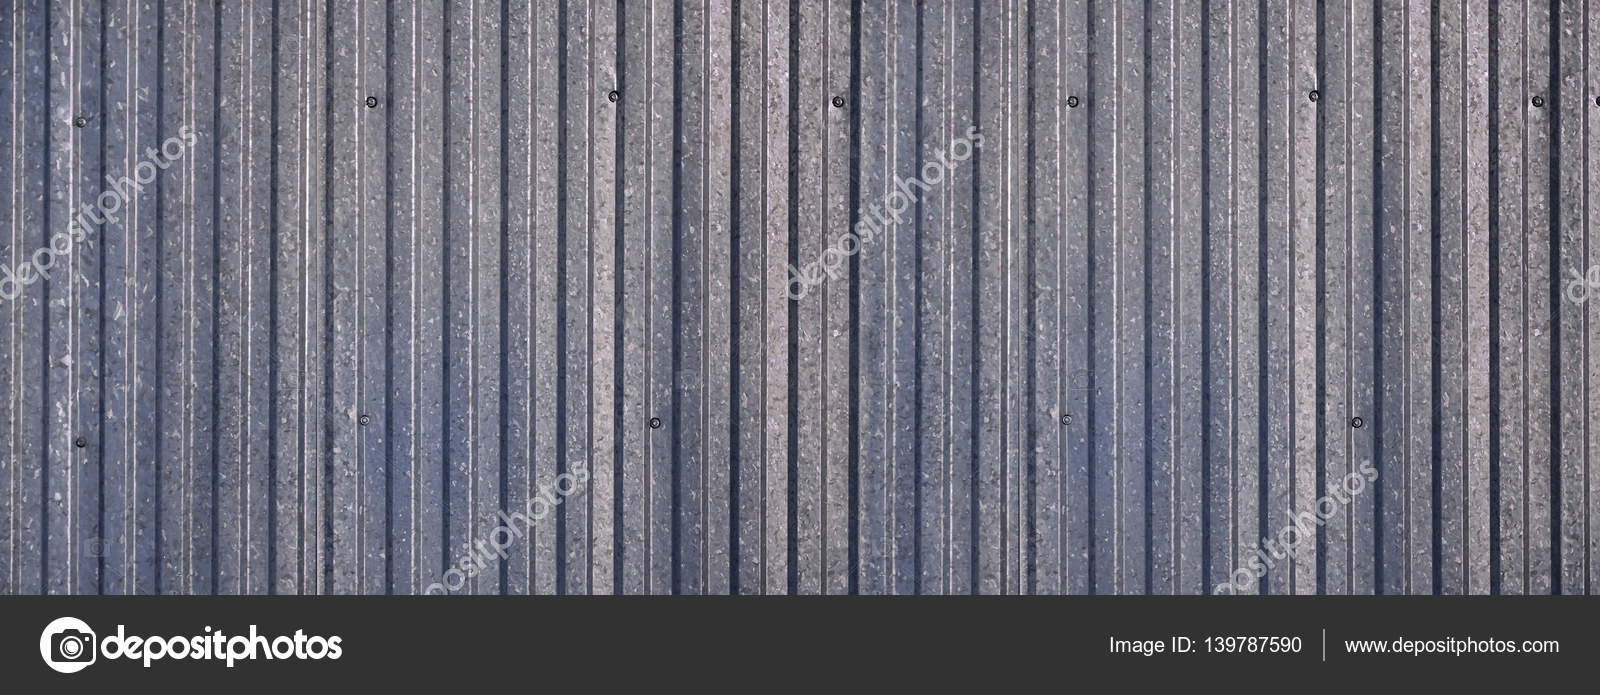 Siding Metal Panels Texture Closeup Daytime Outdoors Metal Wall Fence Stock Photo Image By C Mehaniq